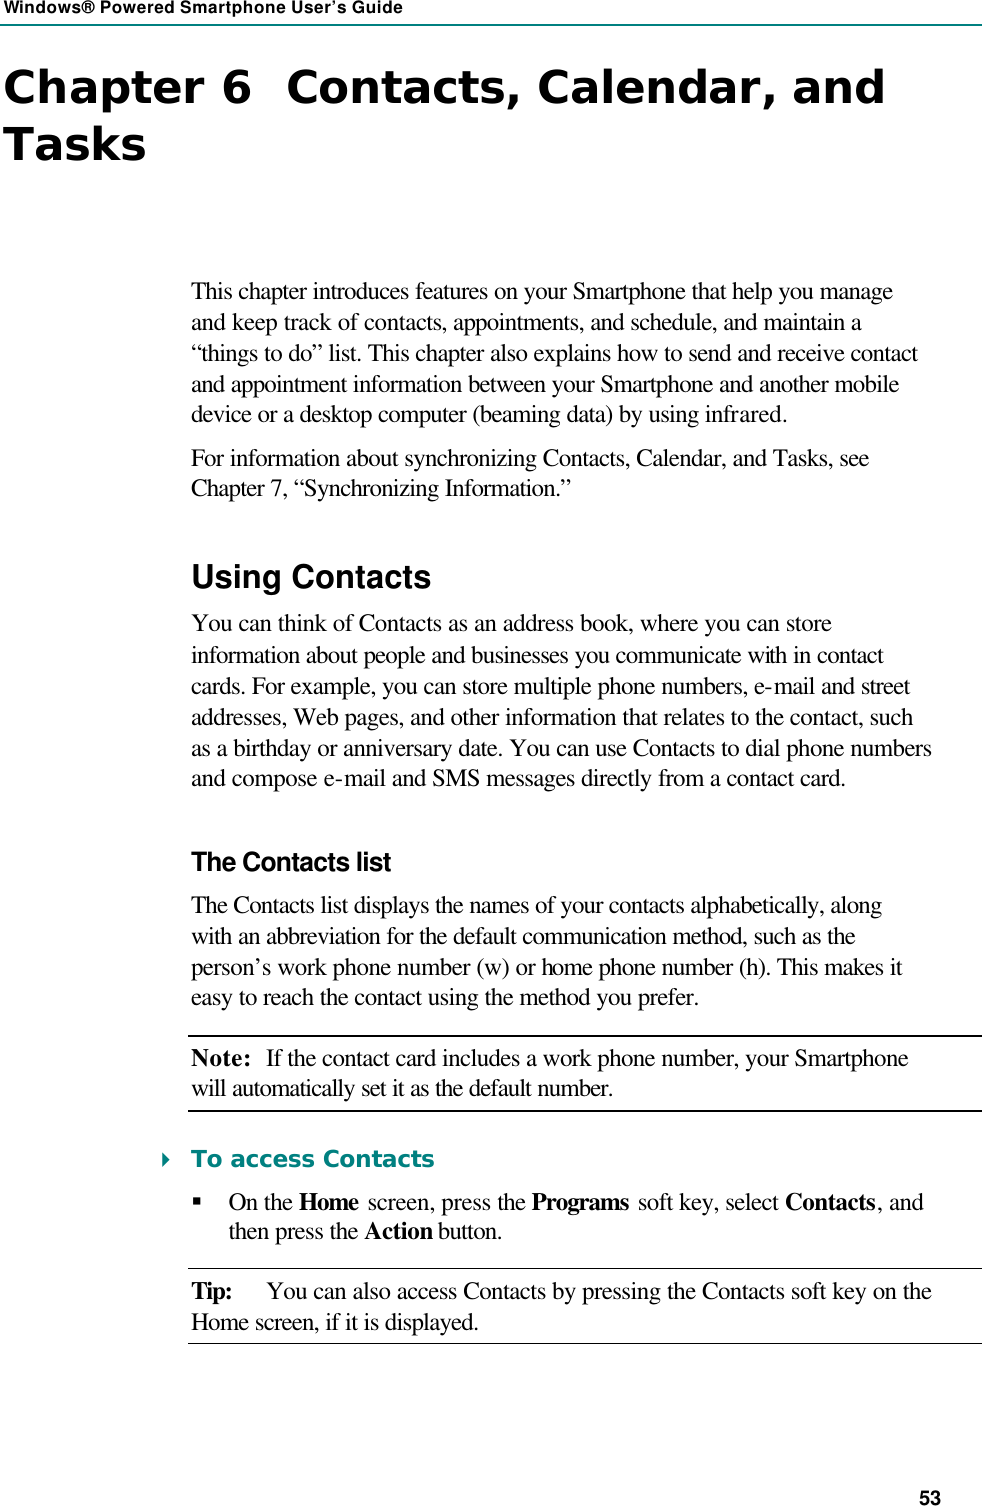 Windows® Powered Smartphone User’s Guide 53 Chapter 6  Contacts, Calendar, and Tasks This chapter introduces features on your Smartphone that help you manage and keep track of contacts, appointments, and schedule, and maintain a “things to do” list. This chapter also explains how to send and receive contact and appointment information between your Smartphone and another mobile device or a desktop computer (beaming data) by using infrared. For information about synchronizing Contacts, Calendar, and Tasks, see Chapter 7, “Synchronizing Information.” Using Contacts You can think of Contacts as an address book, where you can store information about people and businesses you communicate with in contact cards. For example, you can store multiple phone numbers, e-mail and street addresses, Web pages, and other information that relates to the contact, such as a birthday or anniversary date. You can use Contacts to dial phone numbers and compose e-mail and SMS messages directly from a contact card. The Contacts list The Contacts list displays the names of your contacts alphabetically, along with an abbreviation for the default communication method, such as the person’s work phone number (w) or home phone number (h). This makes it easy to reach the contact using the method you prefer. Note: If the contact card includes a work phone number, your Smartphone will automatically set it as the default number. 4 To access Contacts § On the Home screen, press the Programs soft key, select Contacts, and then press the Action button. Tip: You can also access Contacts by pressing the Contacts soft key on the Home screen, if it is displayed. 